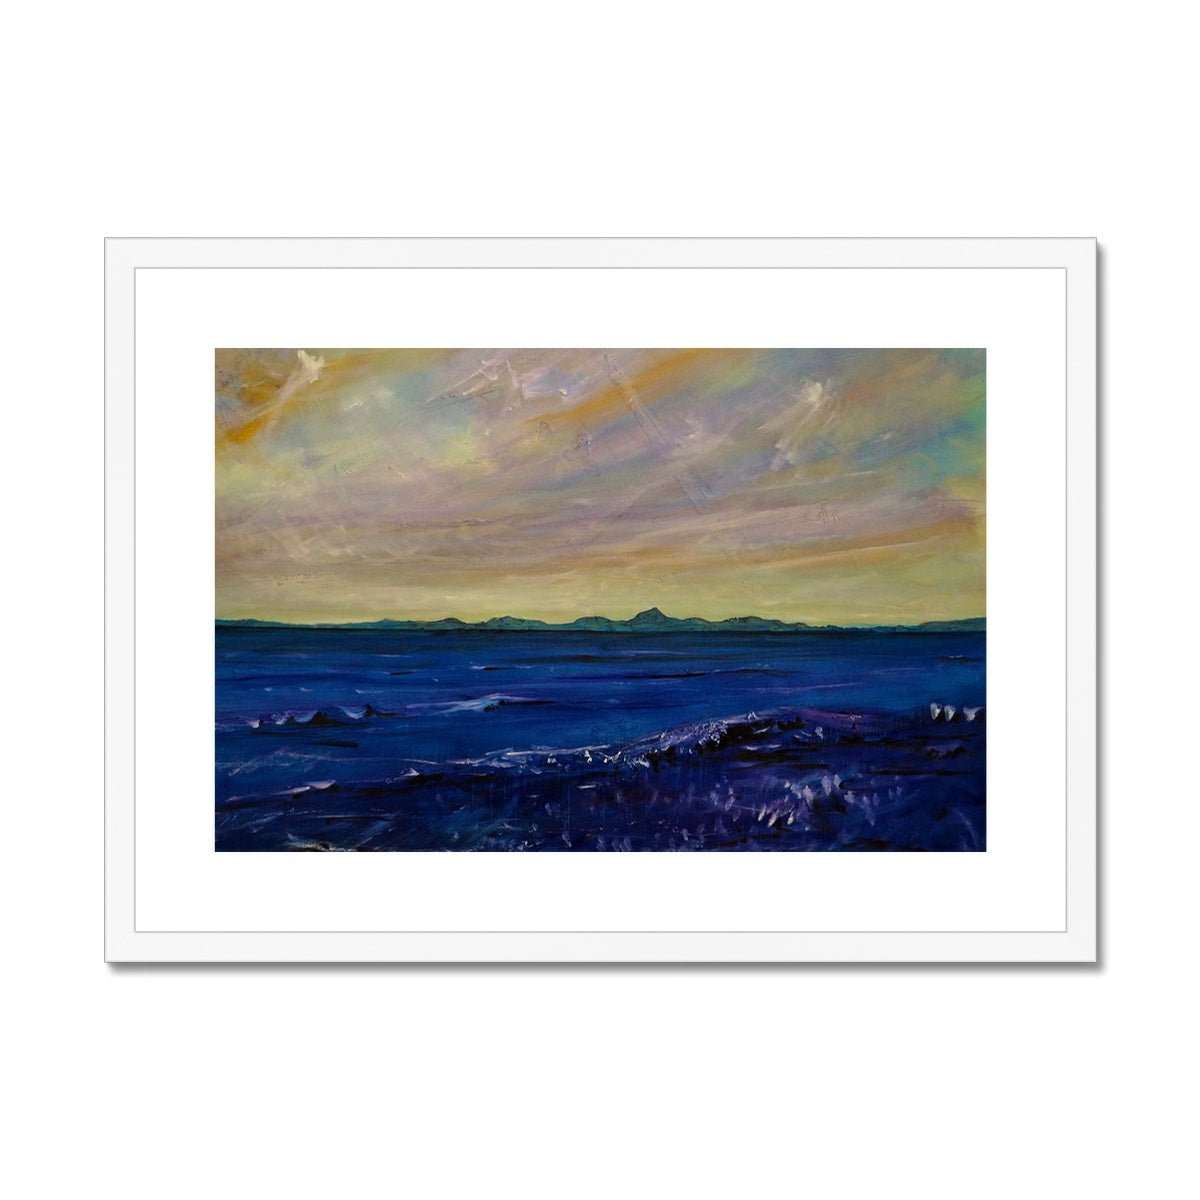 Jura Painting | Framed & Mounted Prints From Scotland-Framed & Mounted Prints-Hebridean Islands Art Gallery-A2 Landscape-White Frame-Paintings, Prints, Homeware, Art Gifts From Scotland By Scottish Artist Kevin Hunter